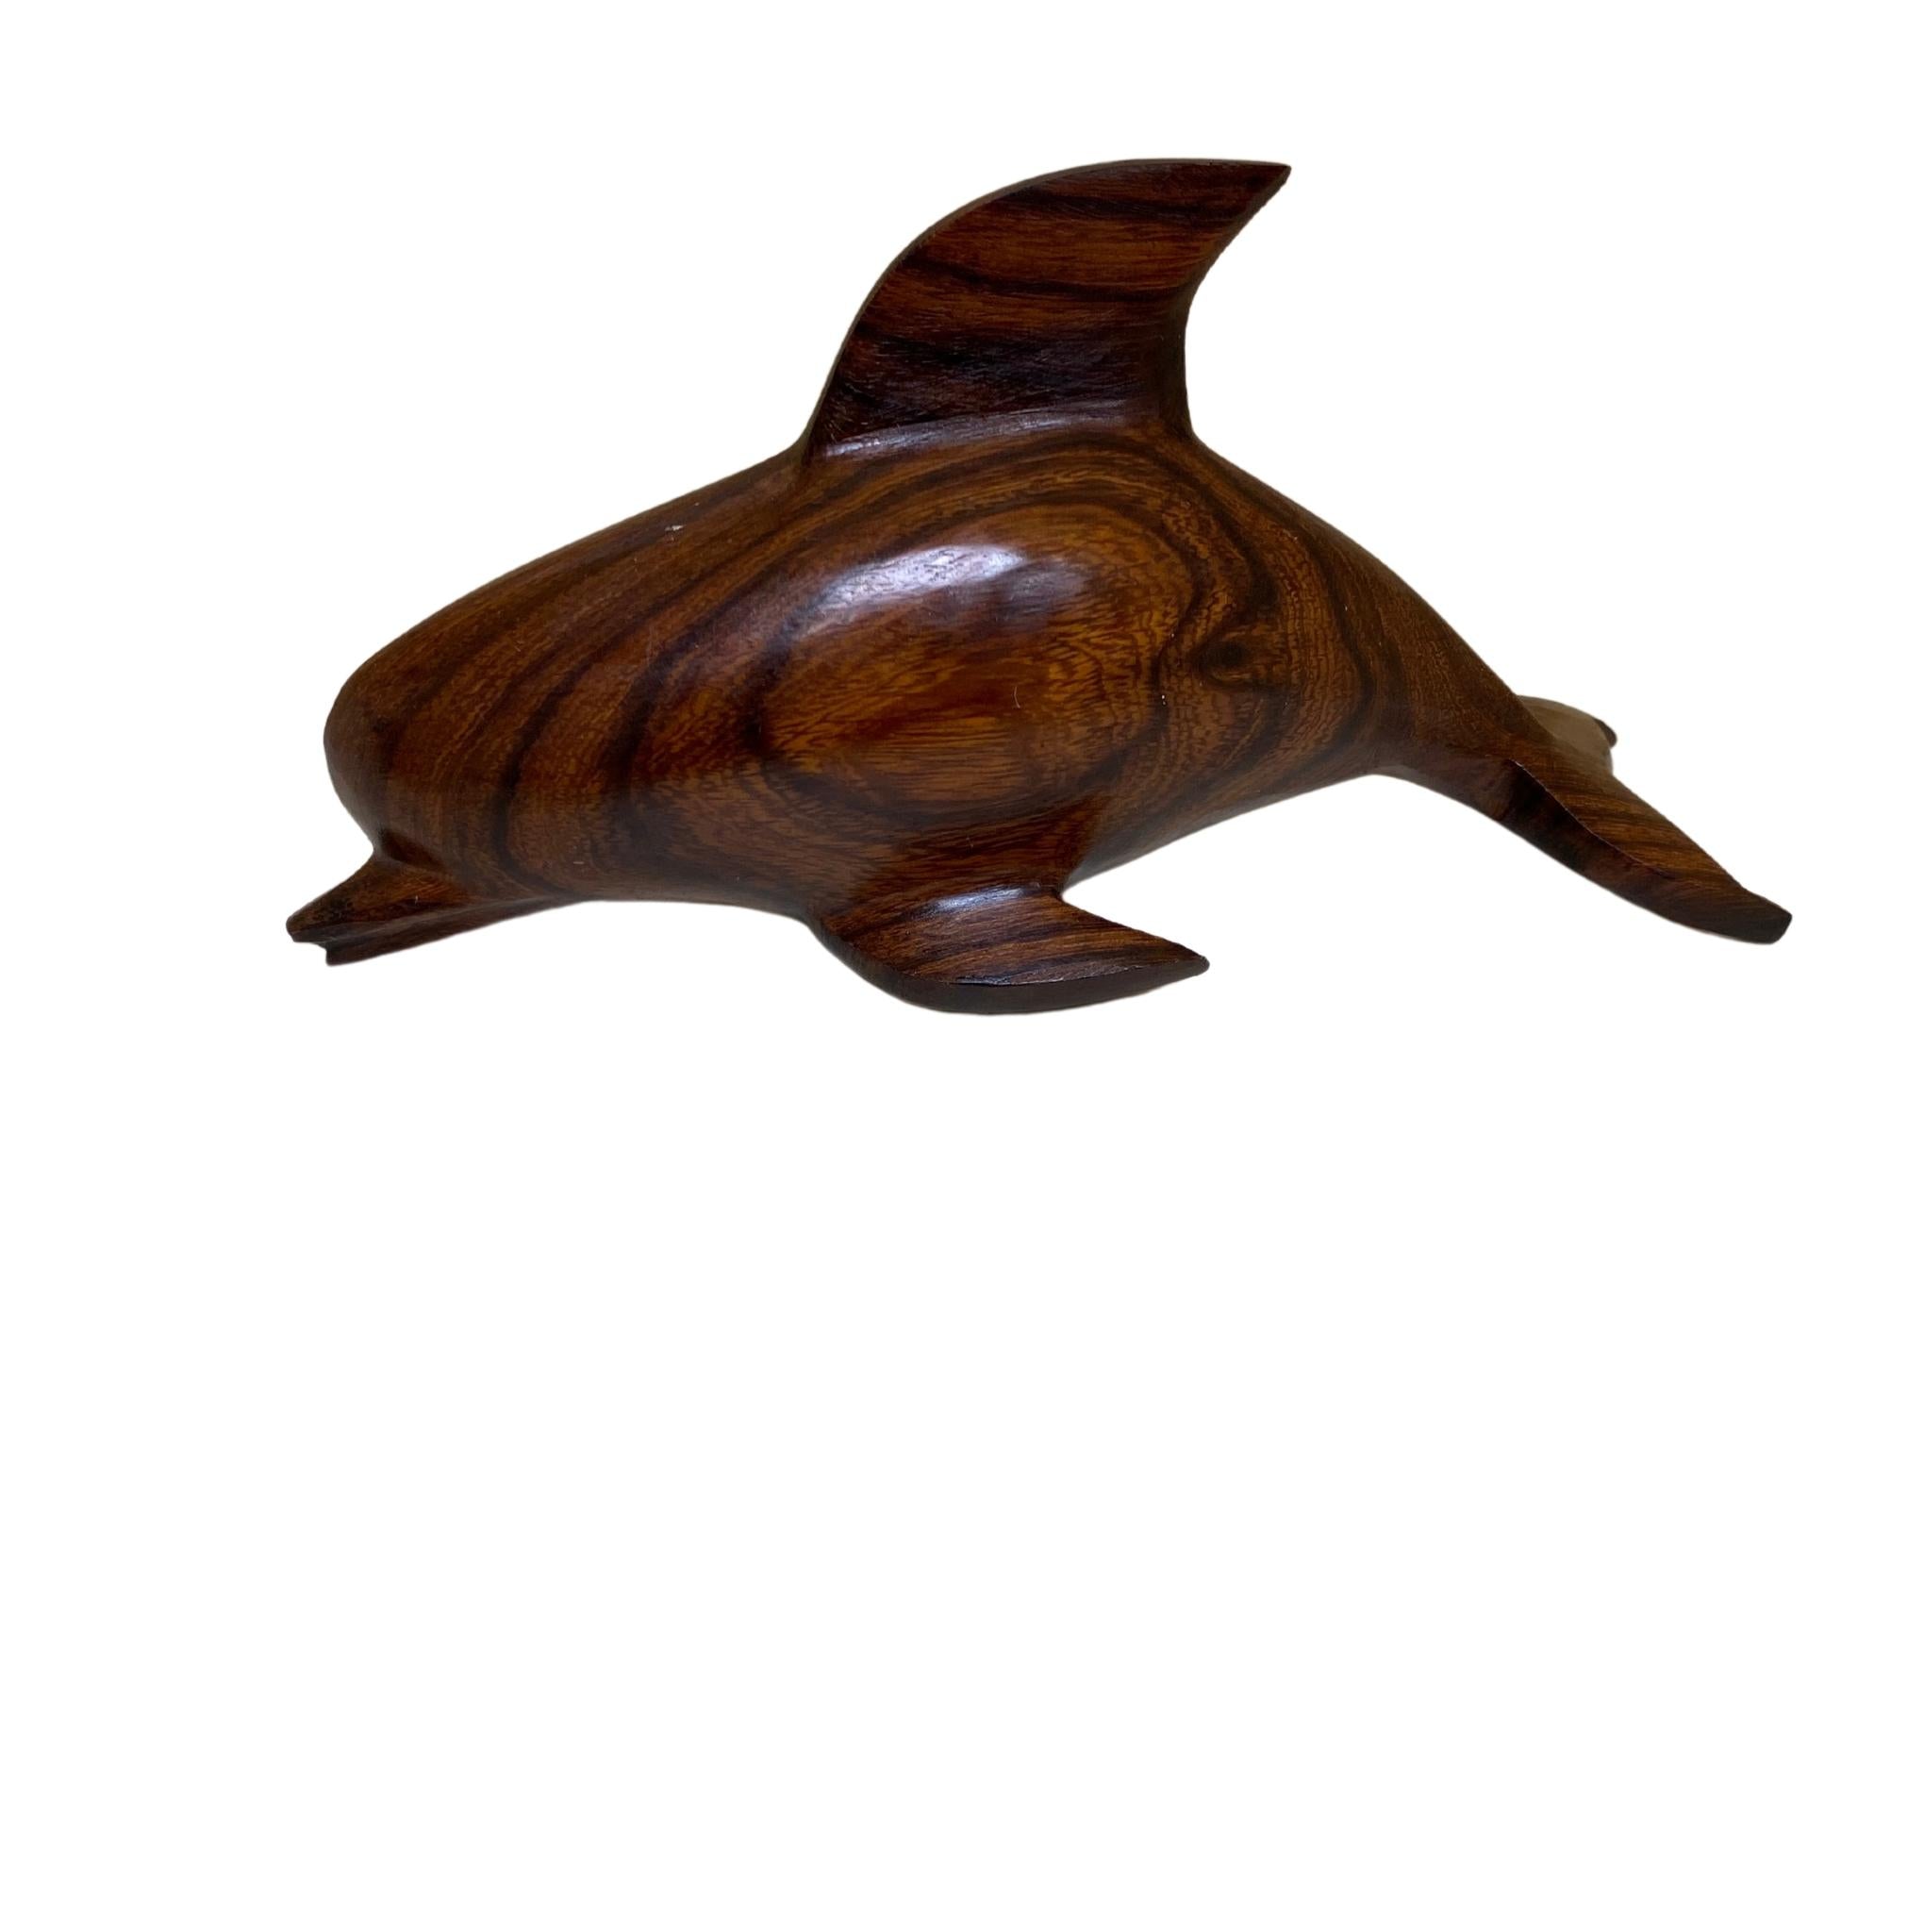 Vintage Ironwood Wood Hand Carved Dolphin Figurine Sculpture 6” - Tobmarc Home Decor & Gifts 